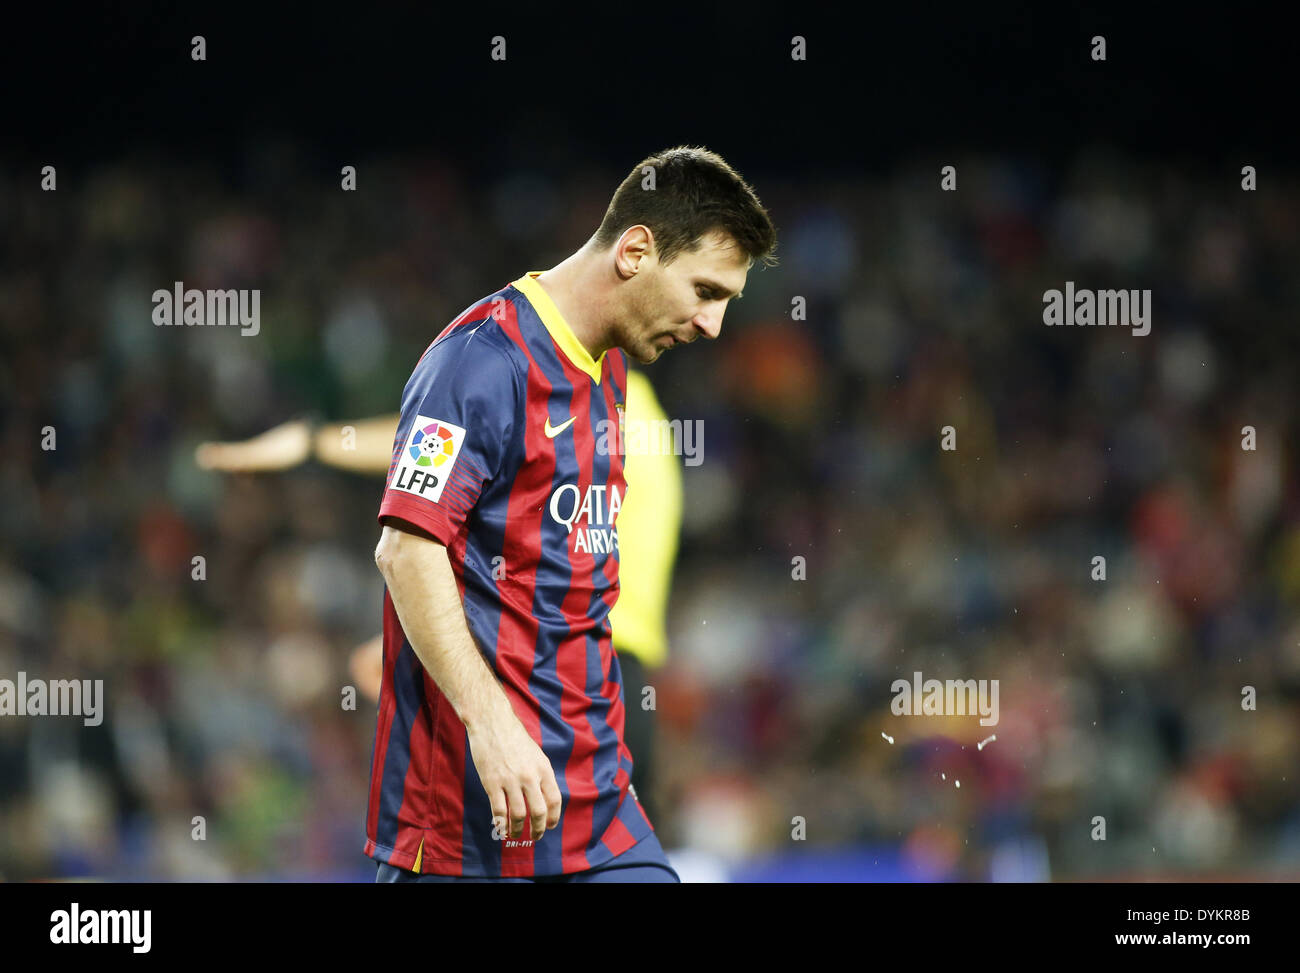 Barcelona, Spain. 20th Apr, 2014. BARCELONA-SPAIN -20 April. Leo Messi in the match between FC Barcelona and Athletic Bilbao, for Week 34 of the spanish League played at the Camp Nou on April 20, 2014 Photo: Aline Delfim/Urbanandsport/NurPhoto © Aline Delfim/NurPhoto/ZUMAPRESS.com/Alamy Live News Stock Photo